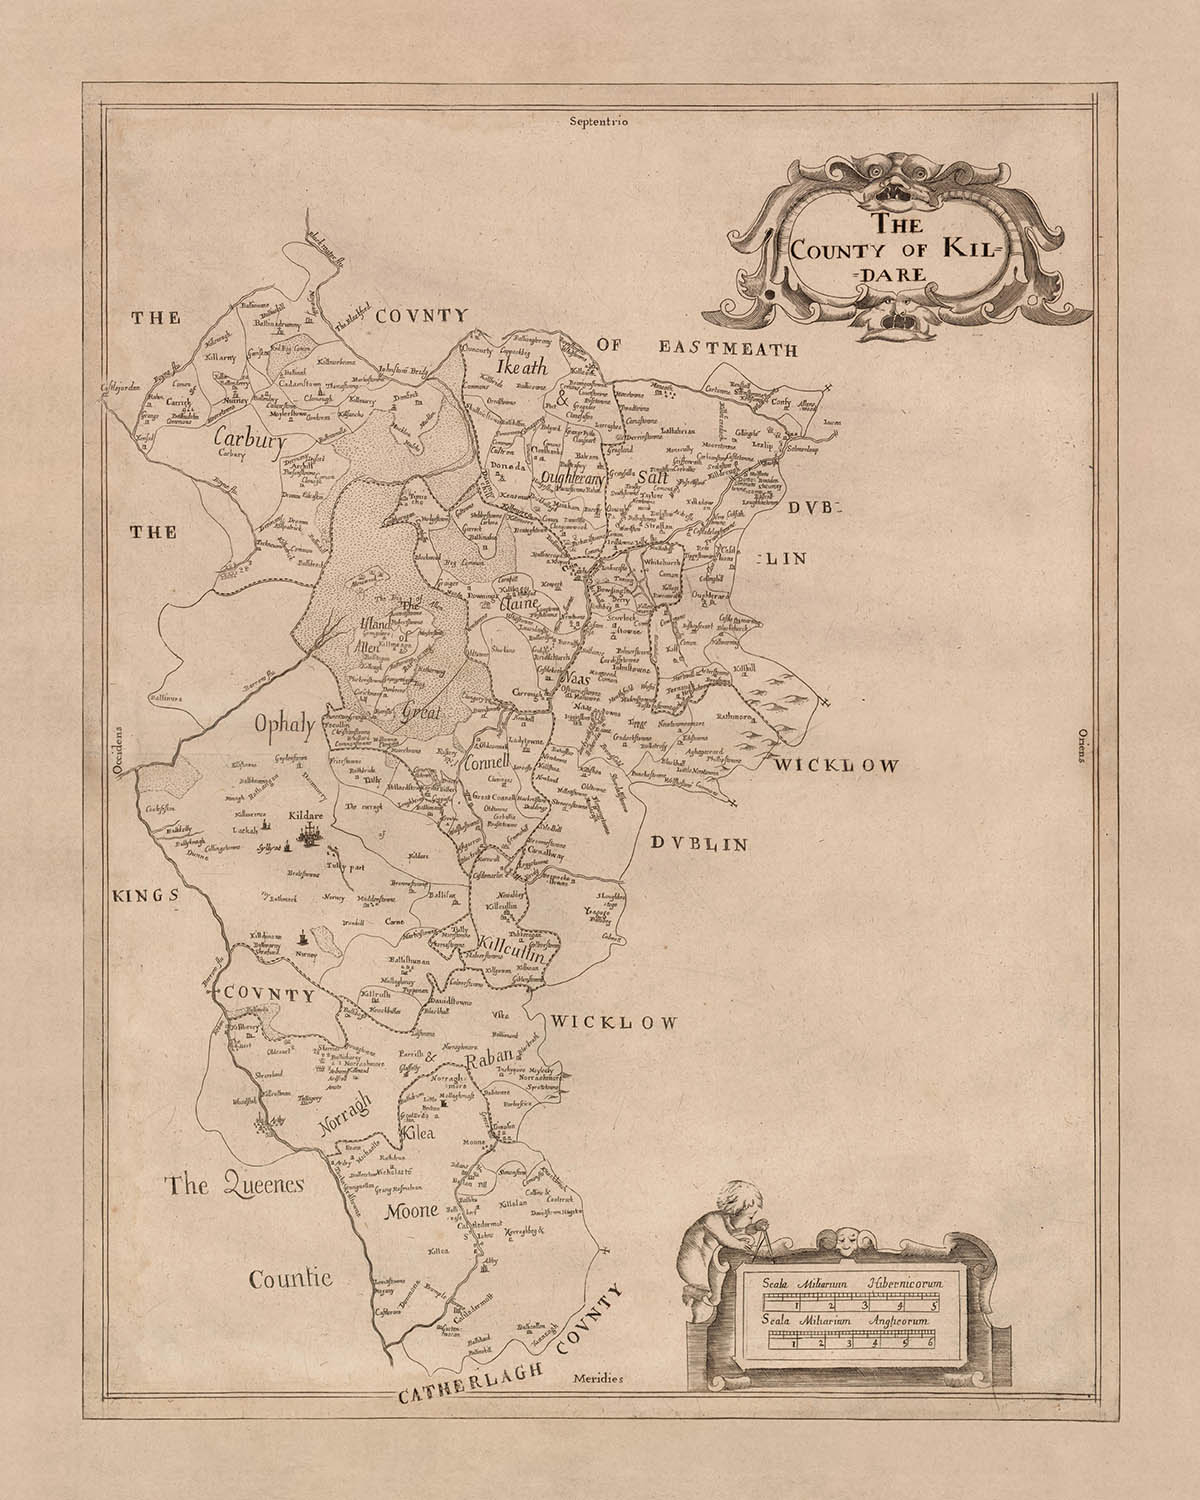 Old Map of County Kildare by Petty, 1685: Kildare, Naas, Maynooth, Castledermot, Monasterevan